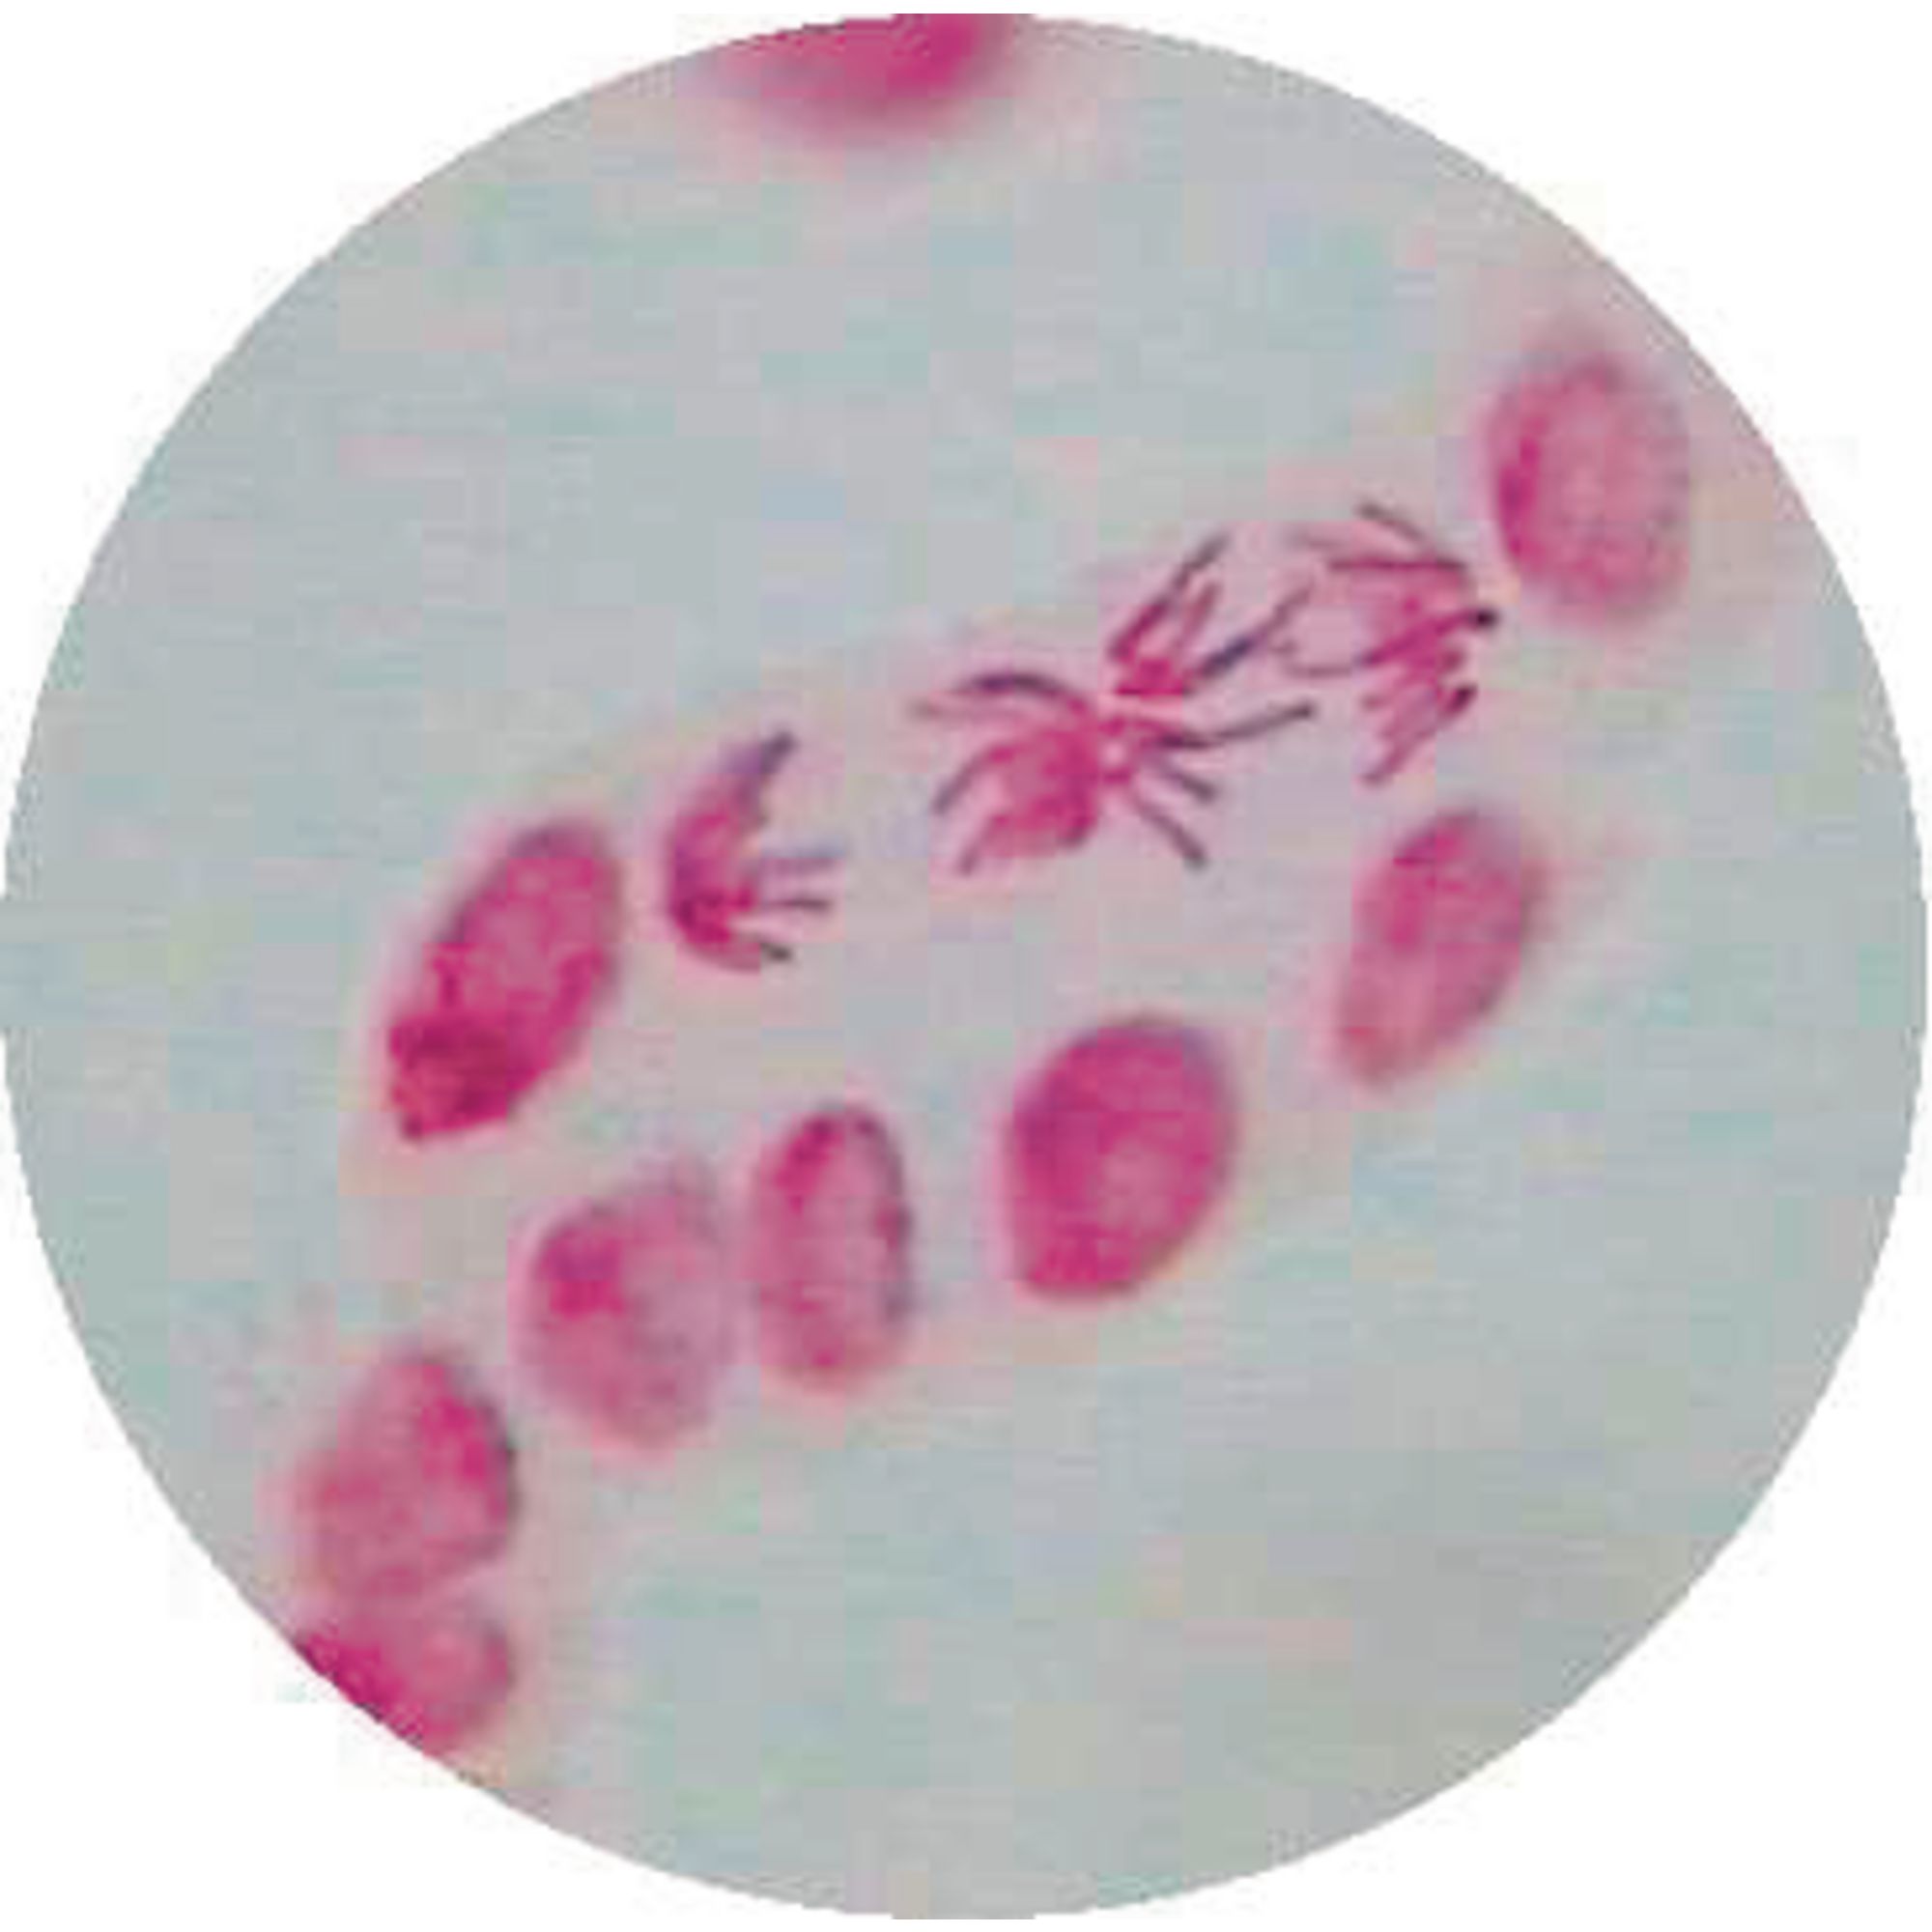 Acetic orcein stain